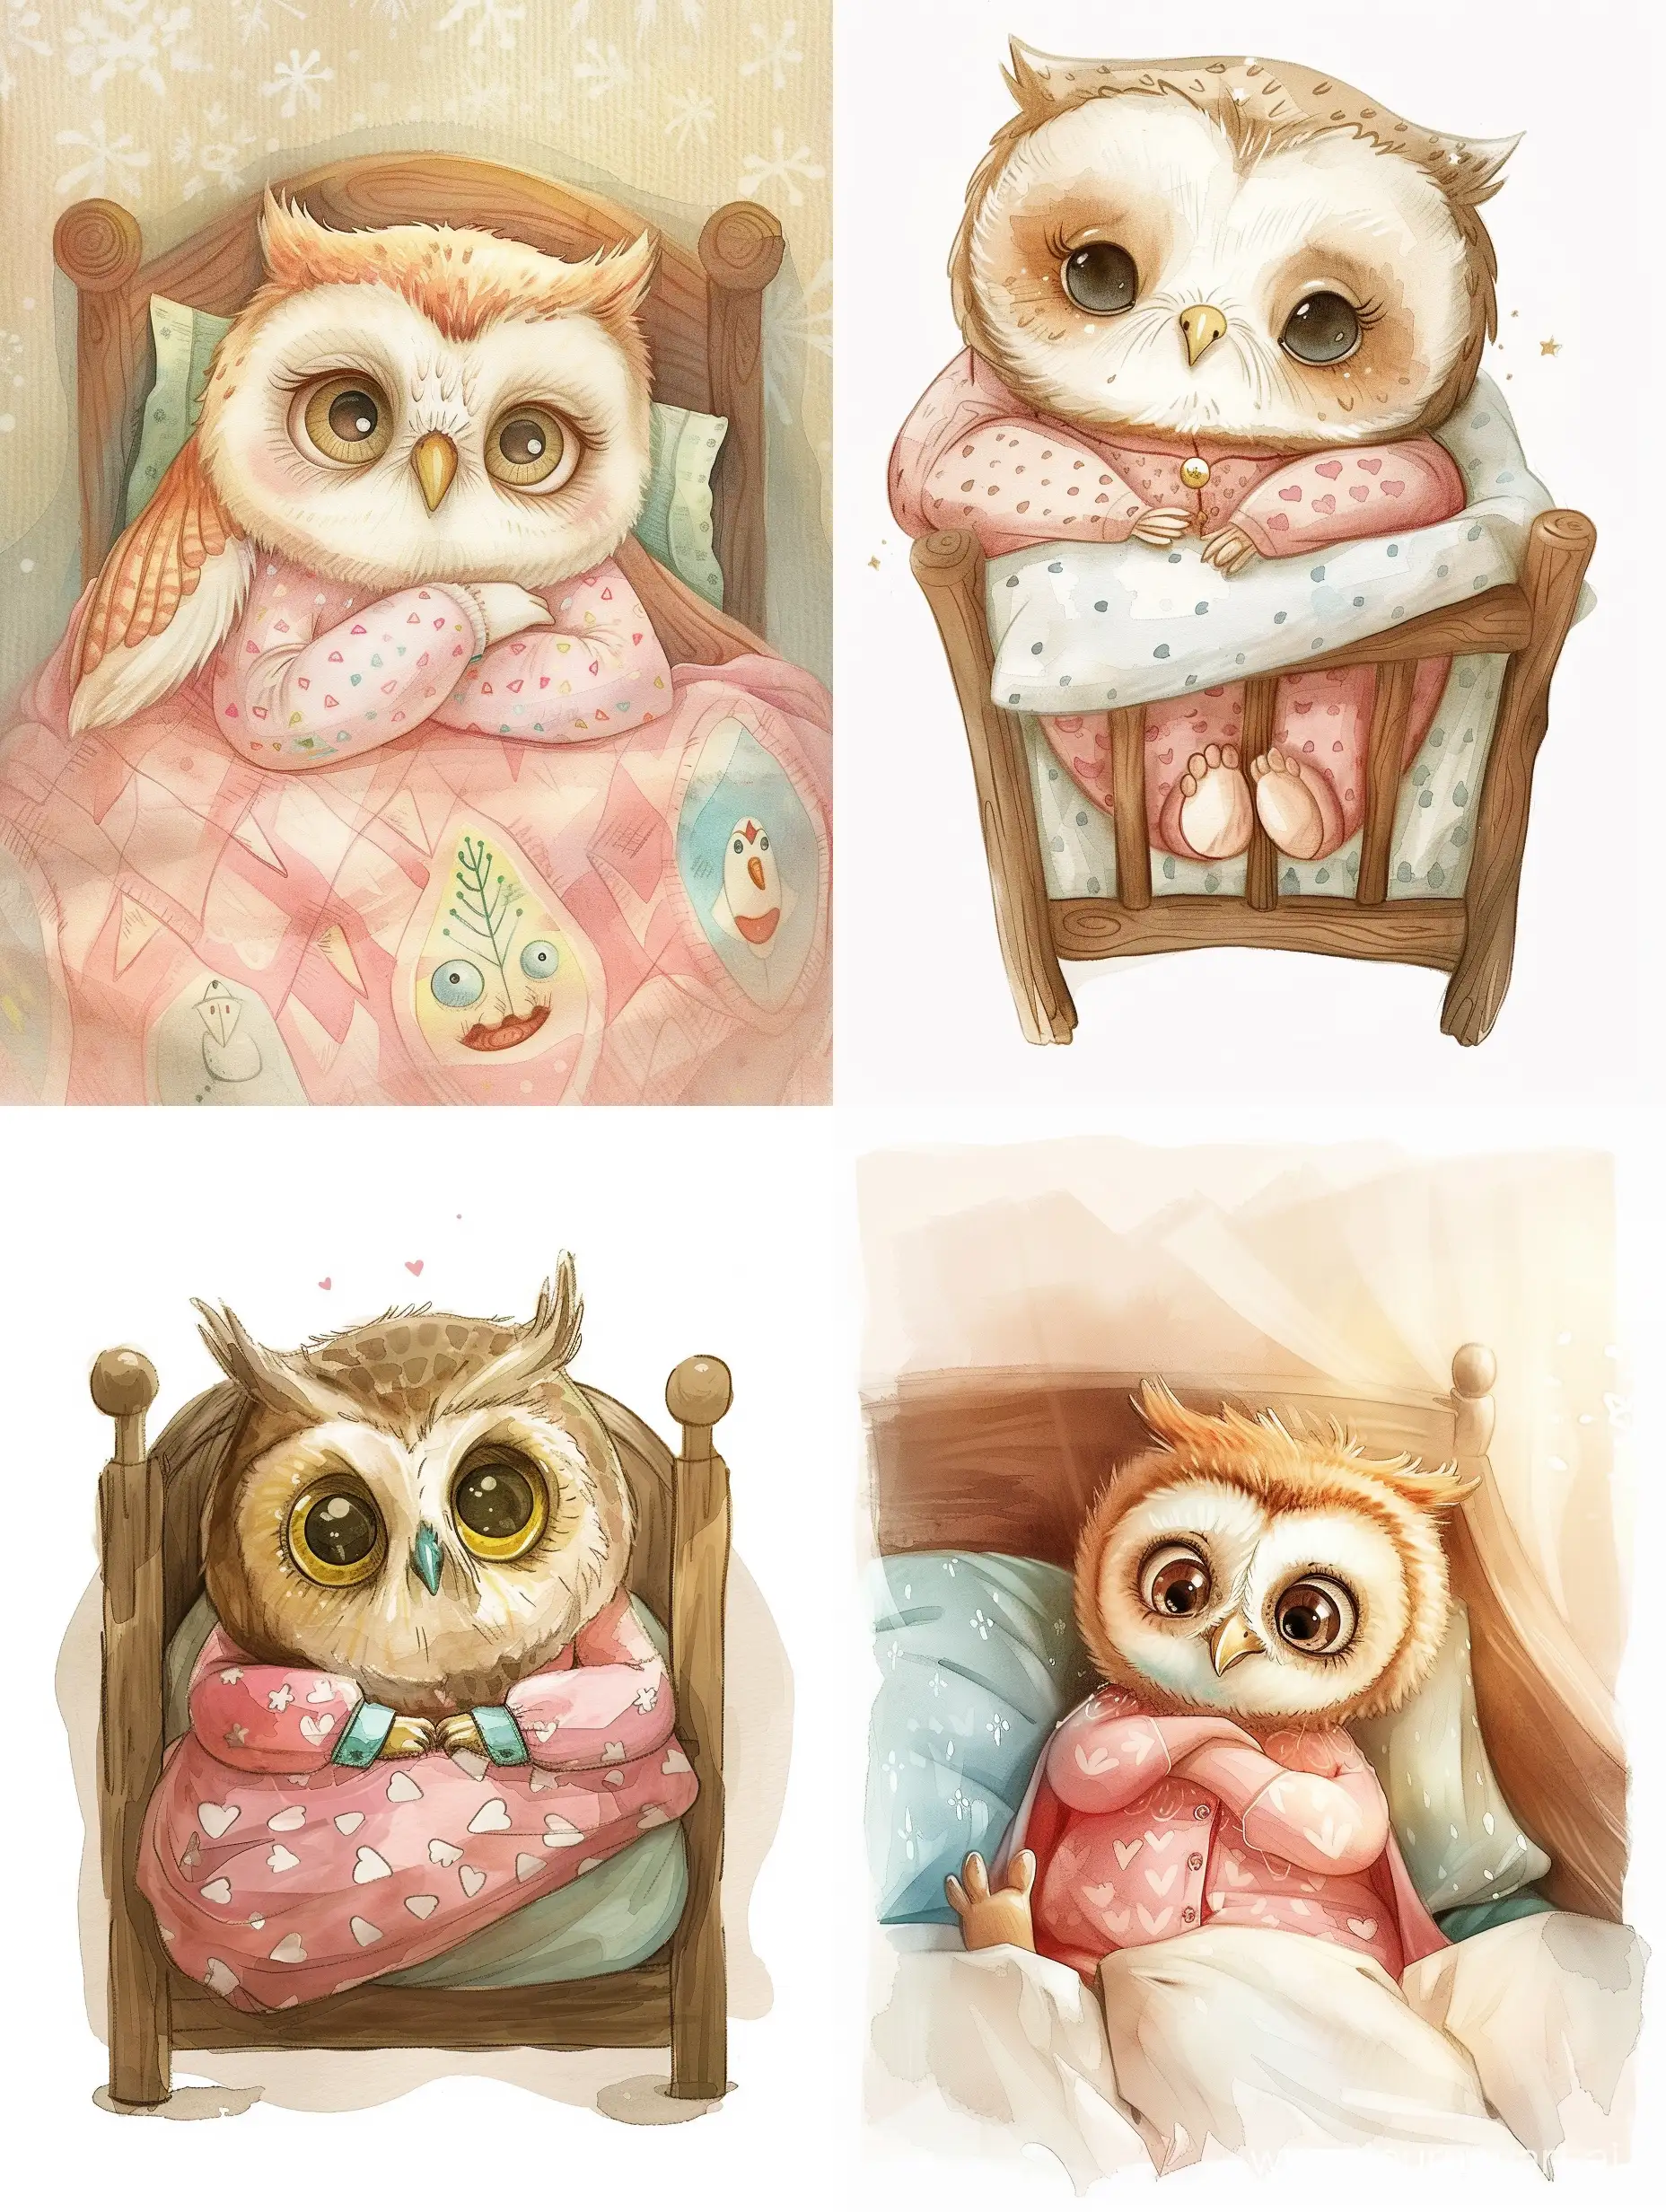 Adorable-Little-Owl-Drawing-in-Bed-in-Cute-Pink-Pajamas